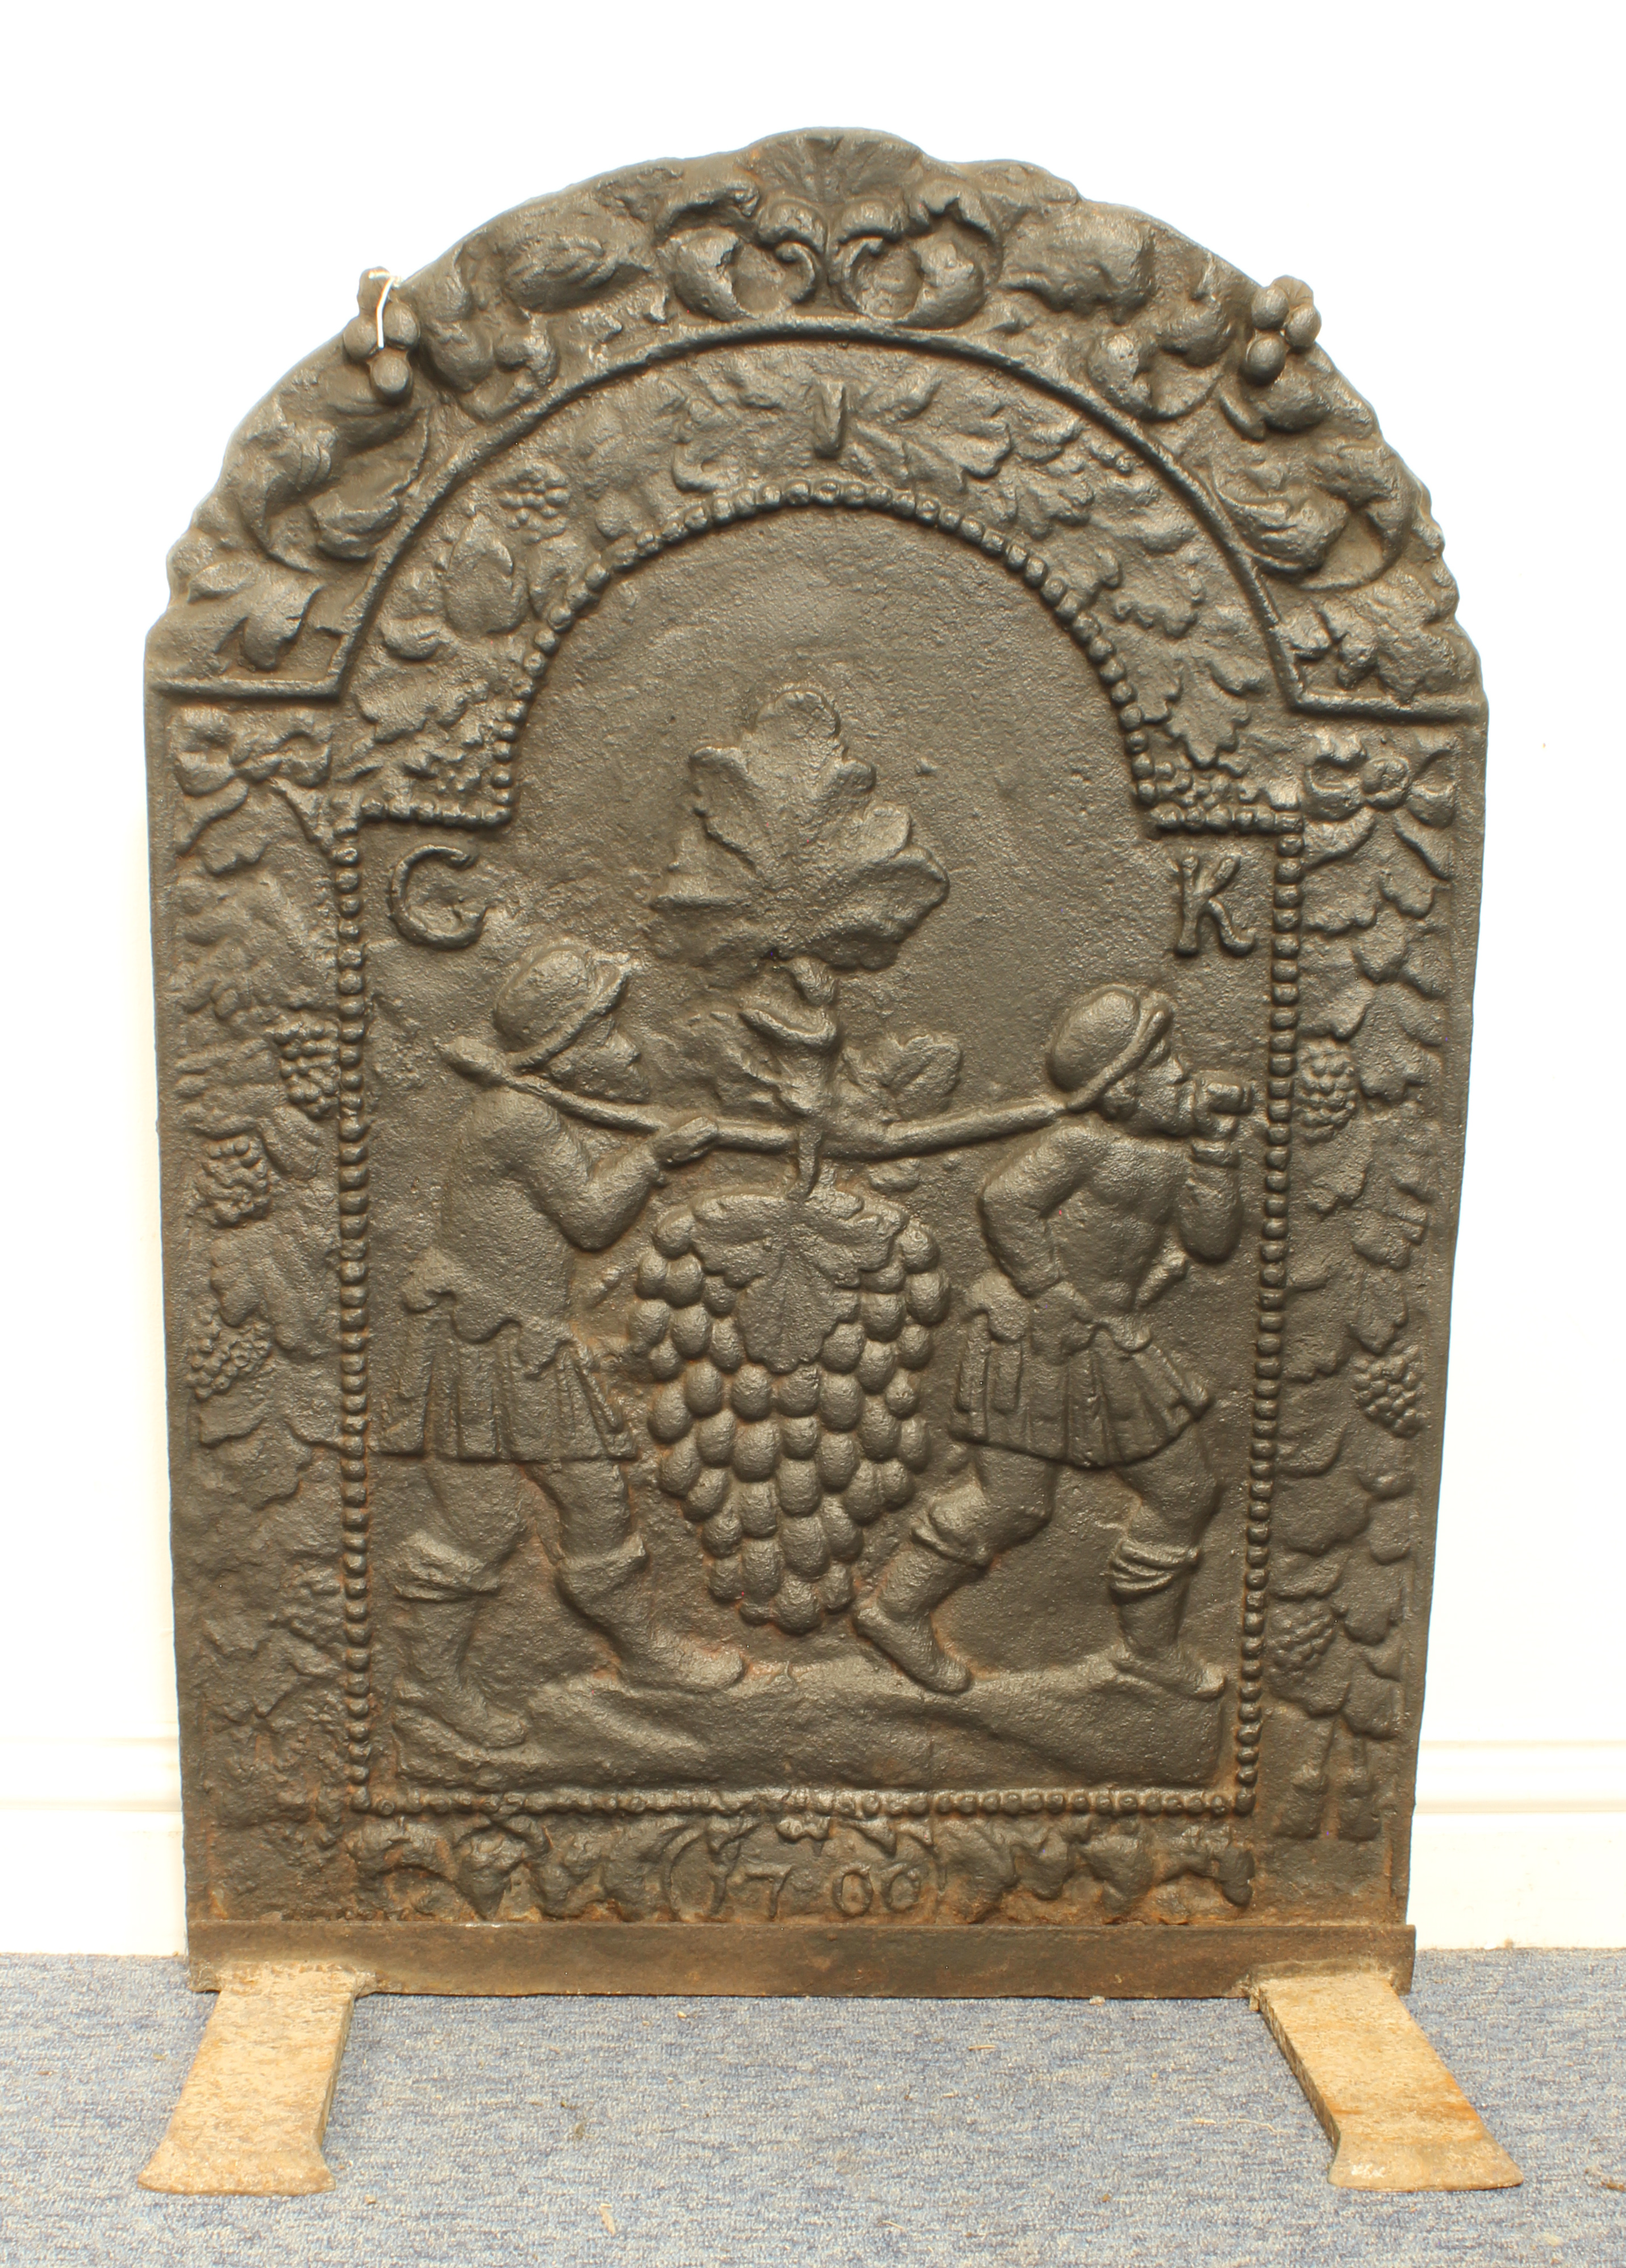 A cast iron fireback with wrought iron grate and firedogs - the arched fireback with cast decoration - Image 3 of 8